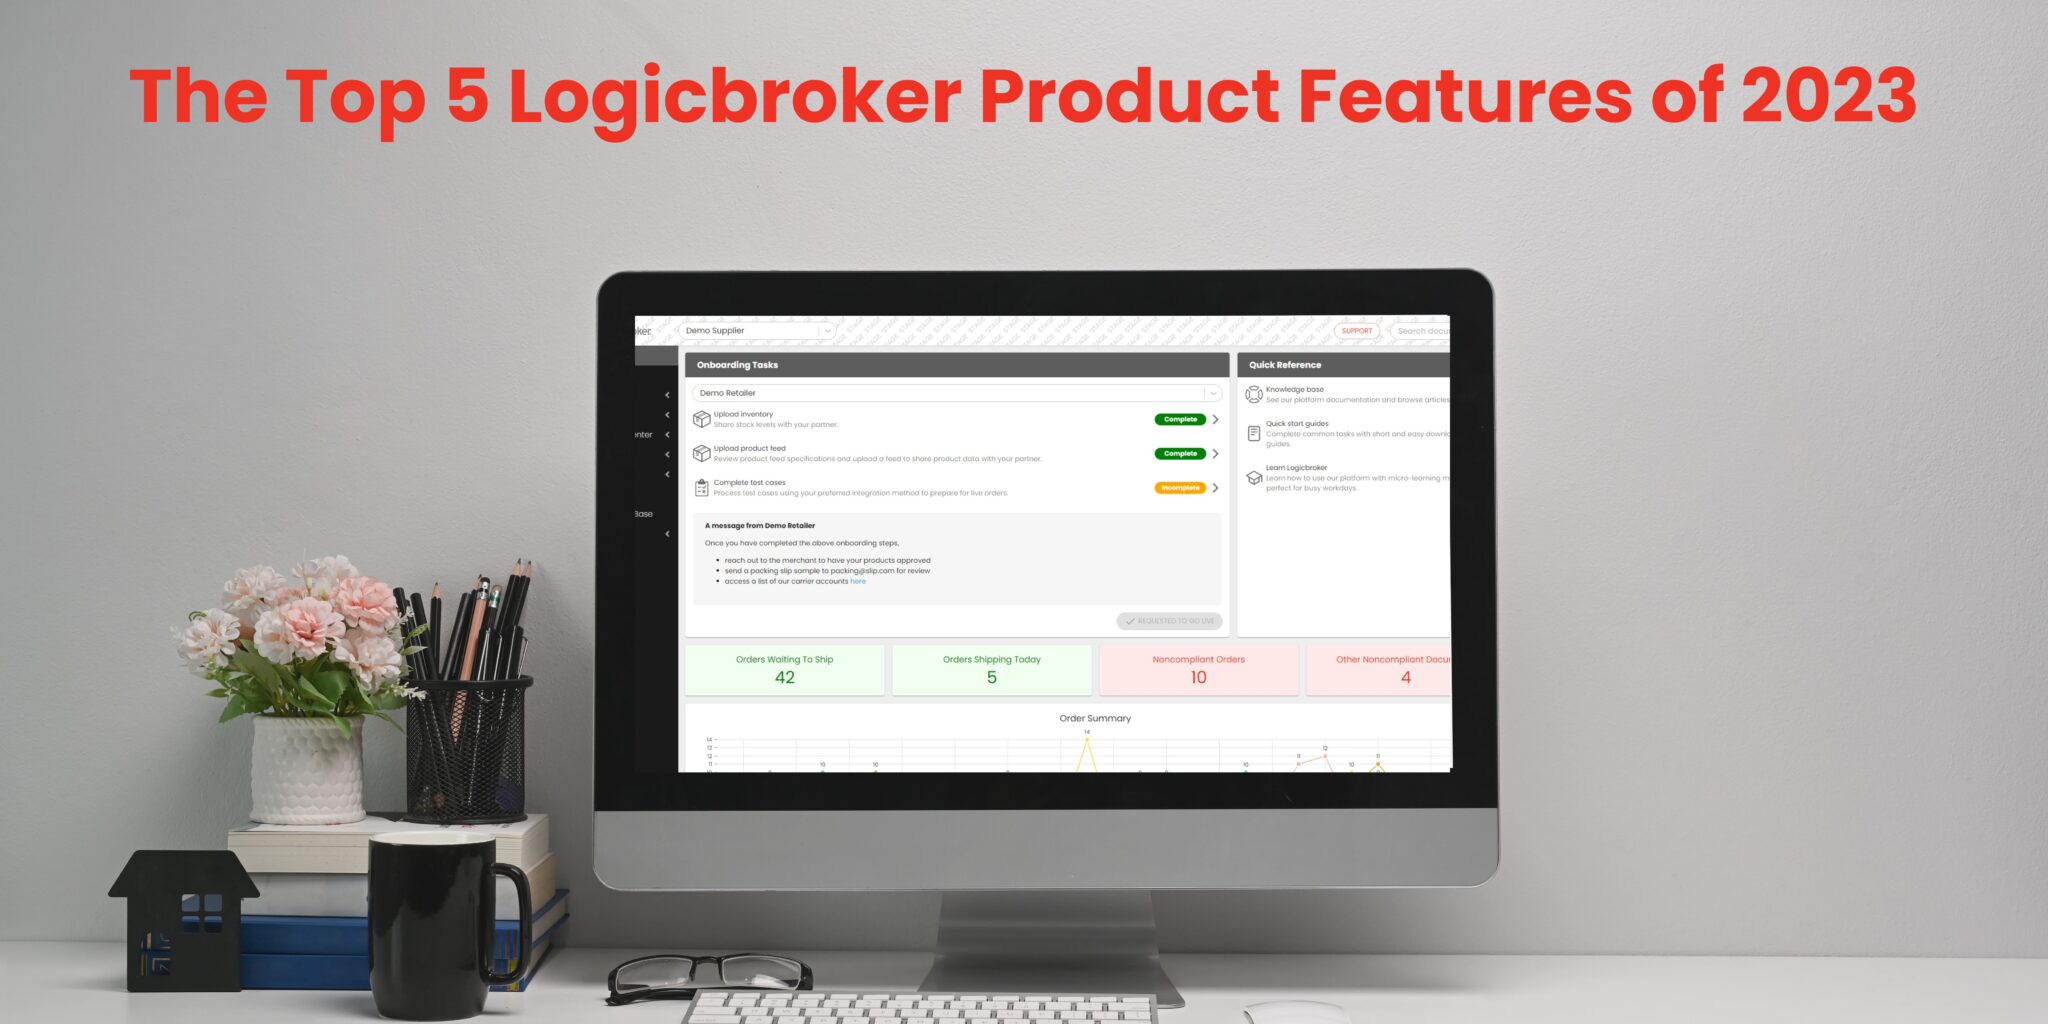 Logicbroker's Top Product Features of 2023